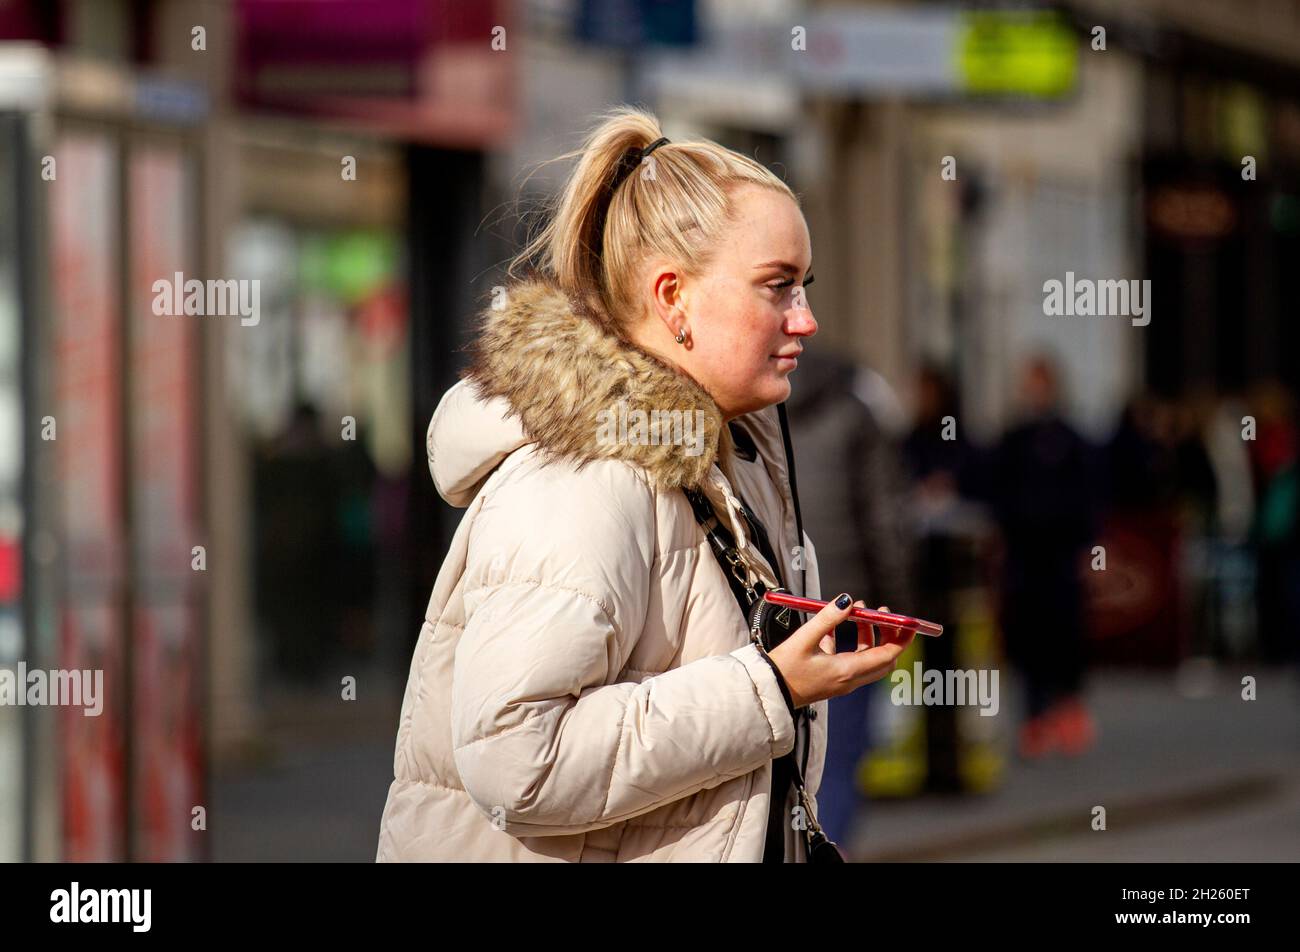 Dundee, Tayside, Scotland, UK. 20th Oct, 2021. UK Weather: A warm sunny Autumn day with a strong breeze across North East Scotland, temperatures reaching 14°C. An attractive young woman is spending the day out enjoying the October sunshine talking on her mobile phone whilst shopping in Dundee city centre. Credit: Dundee Photographics/Alamy Live News Stock Photo